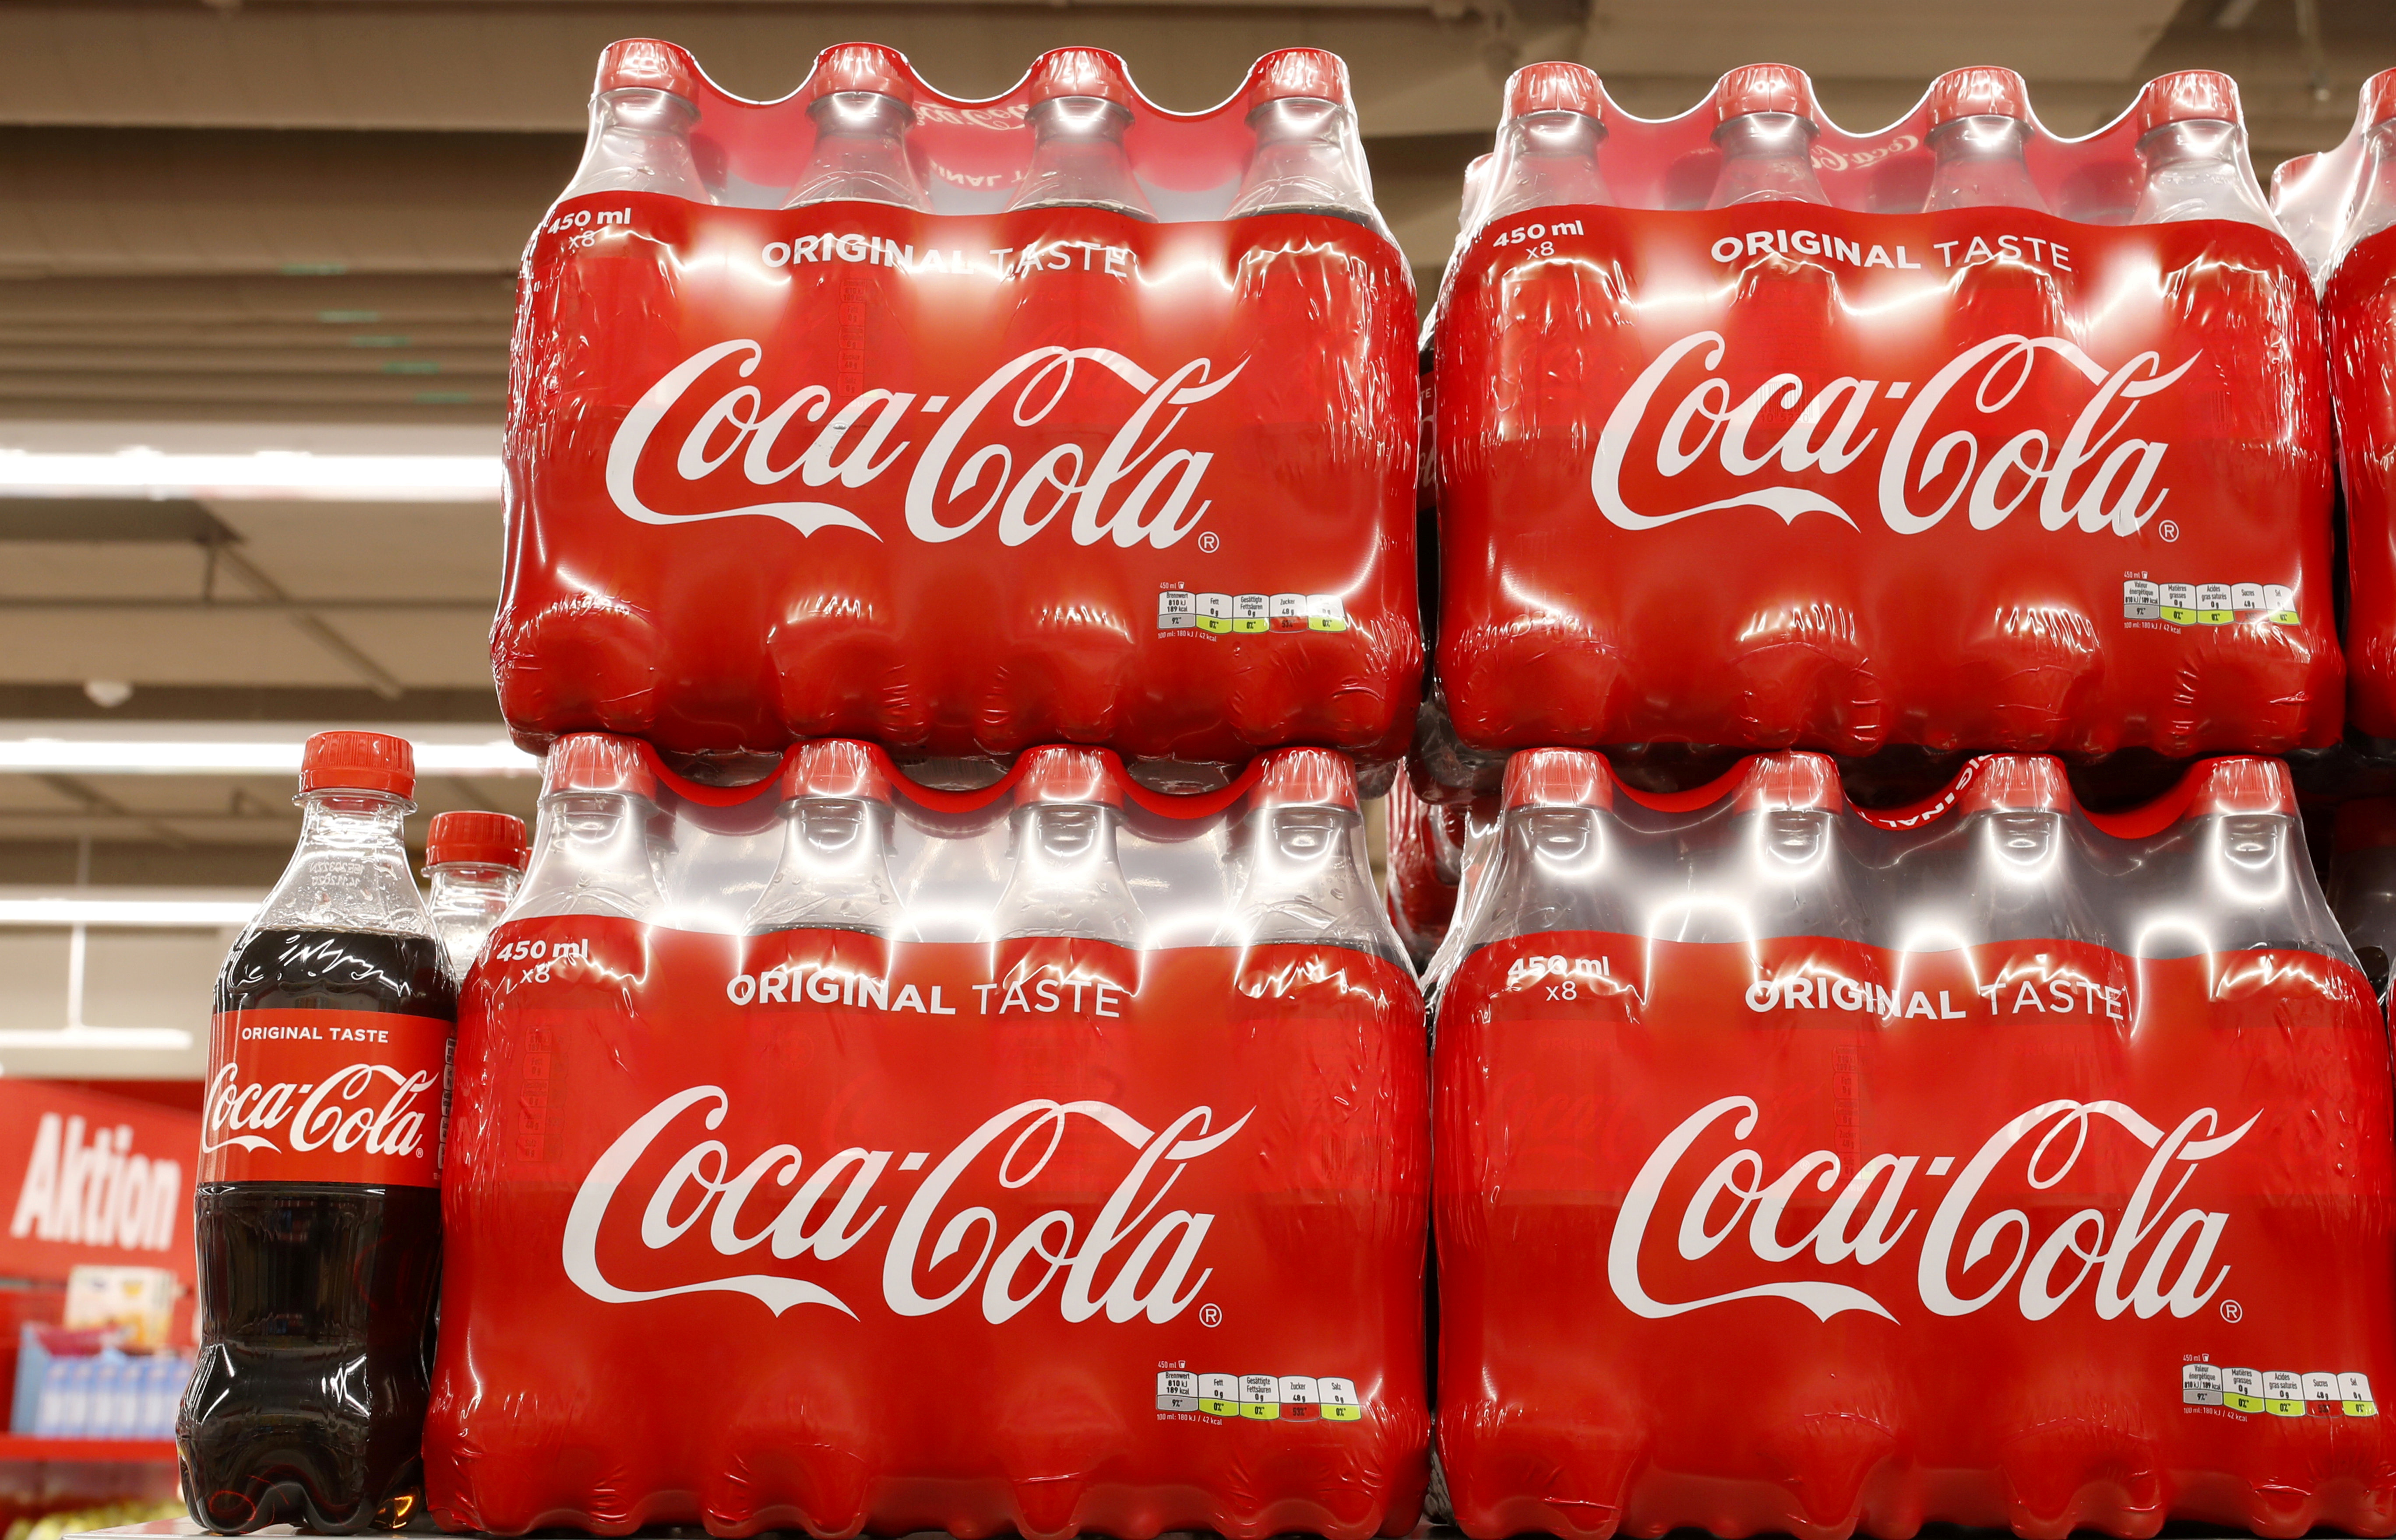 Bottles of Coca-Cola are displayed at a supermarket of Swiss retailer Denner, as the spread of the coronavirus disease (COVID-19) continues, in Glattbrugg, Switzerland June 26, 2020. Picture taken June 26, 2020. REUTERS/Arnd Wiegmann